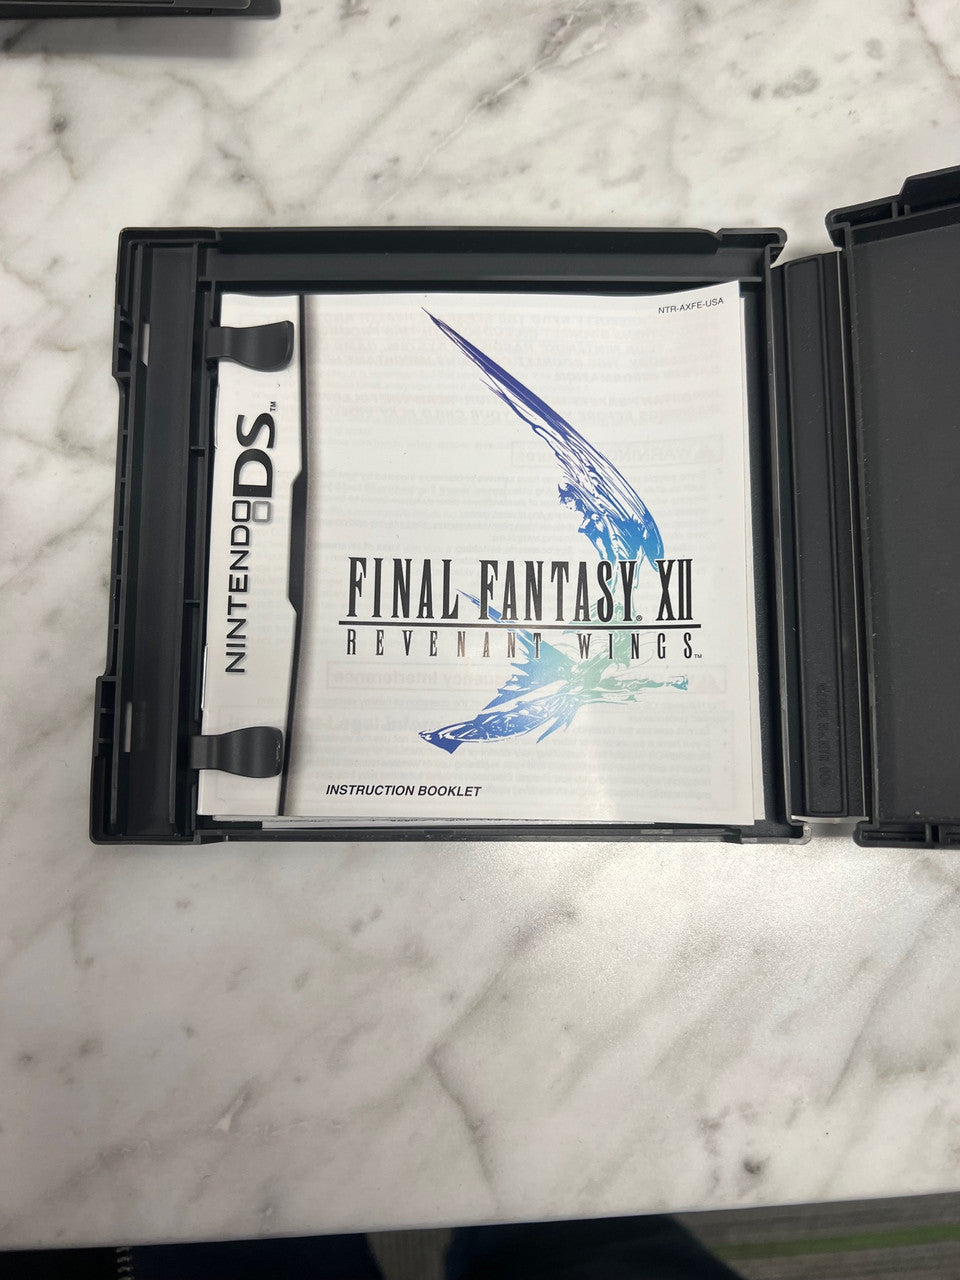 Final Fantasy XII Revenant Wings Nintendo DS Case and Manual